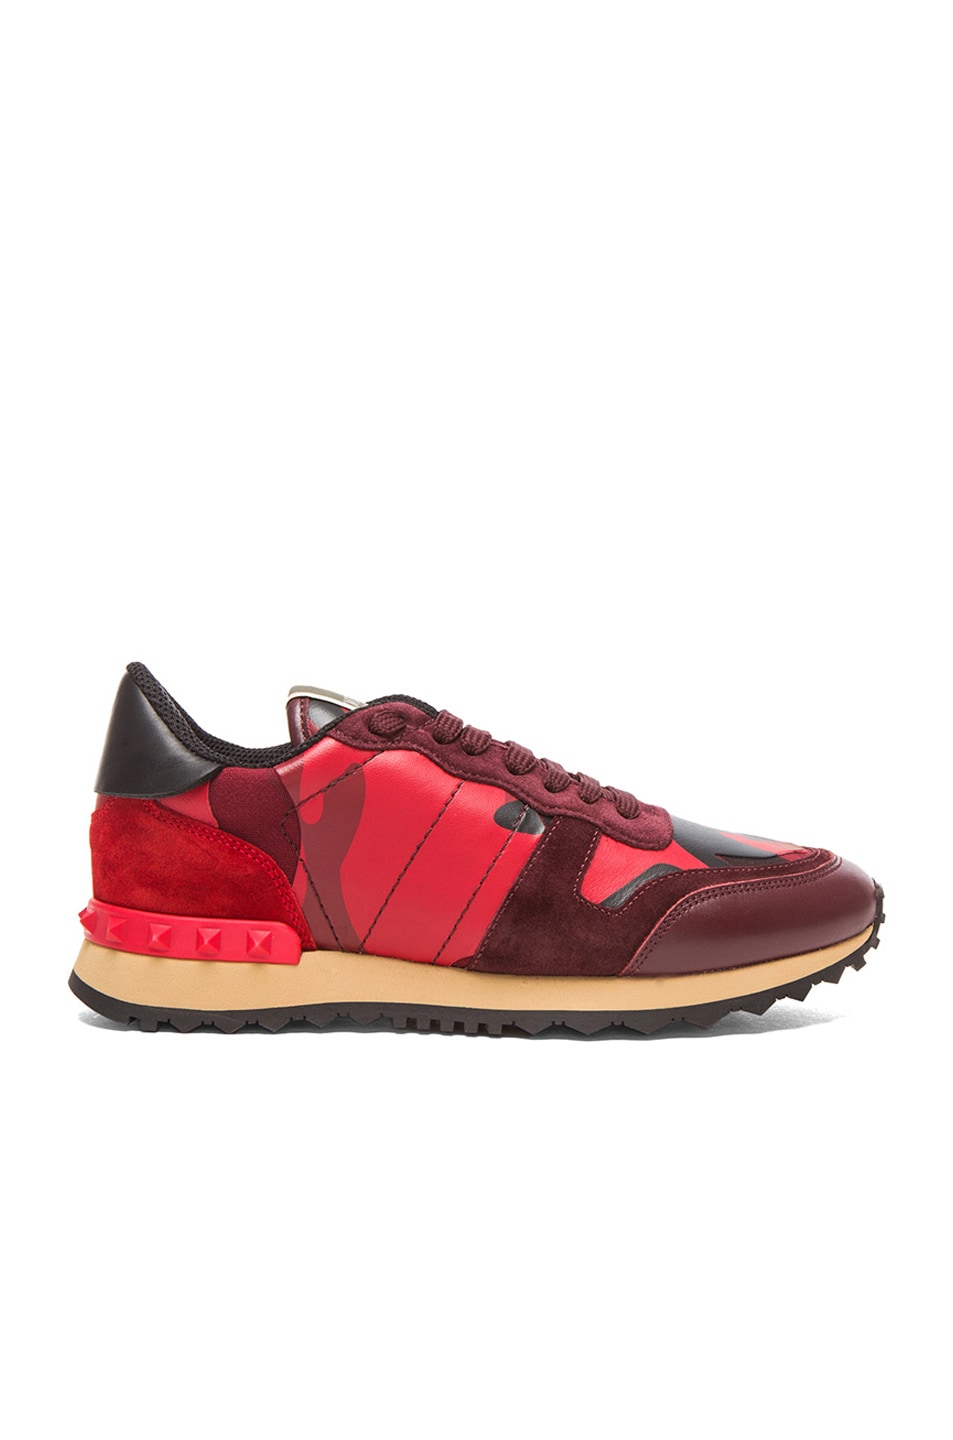 Valentino Camouflage Canvas & Suede Trainers in Red Camo | FWRD